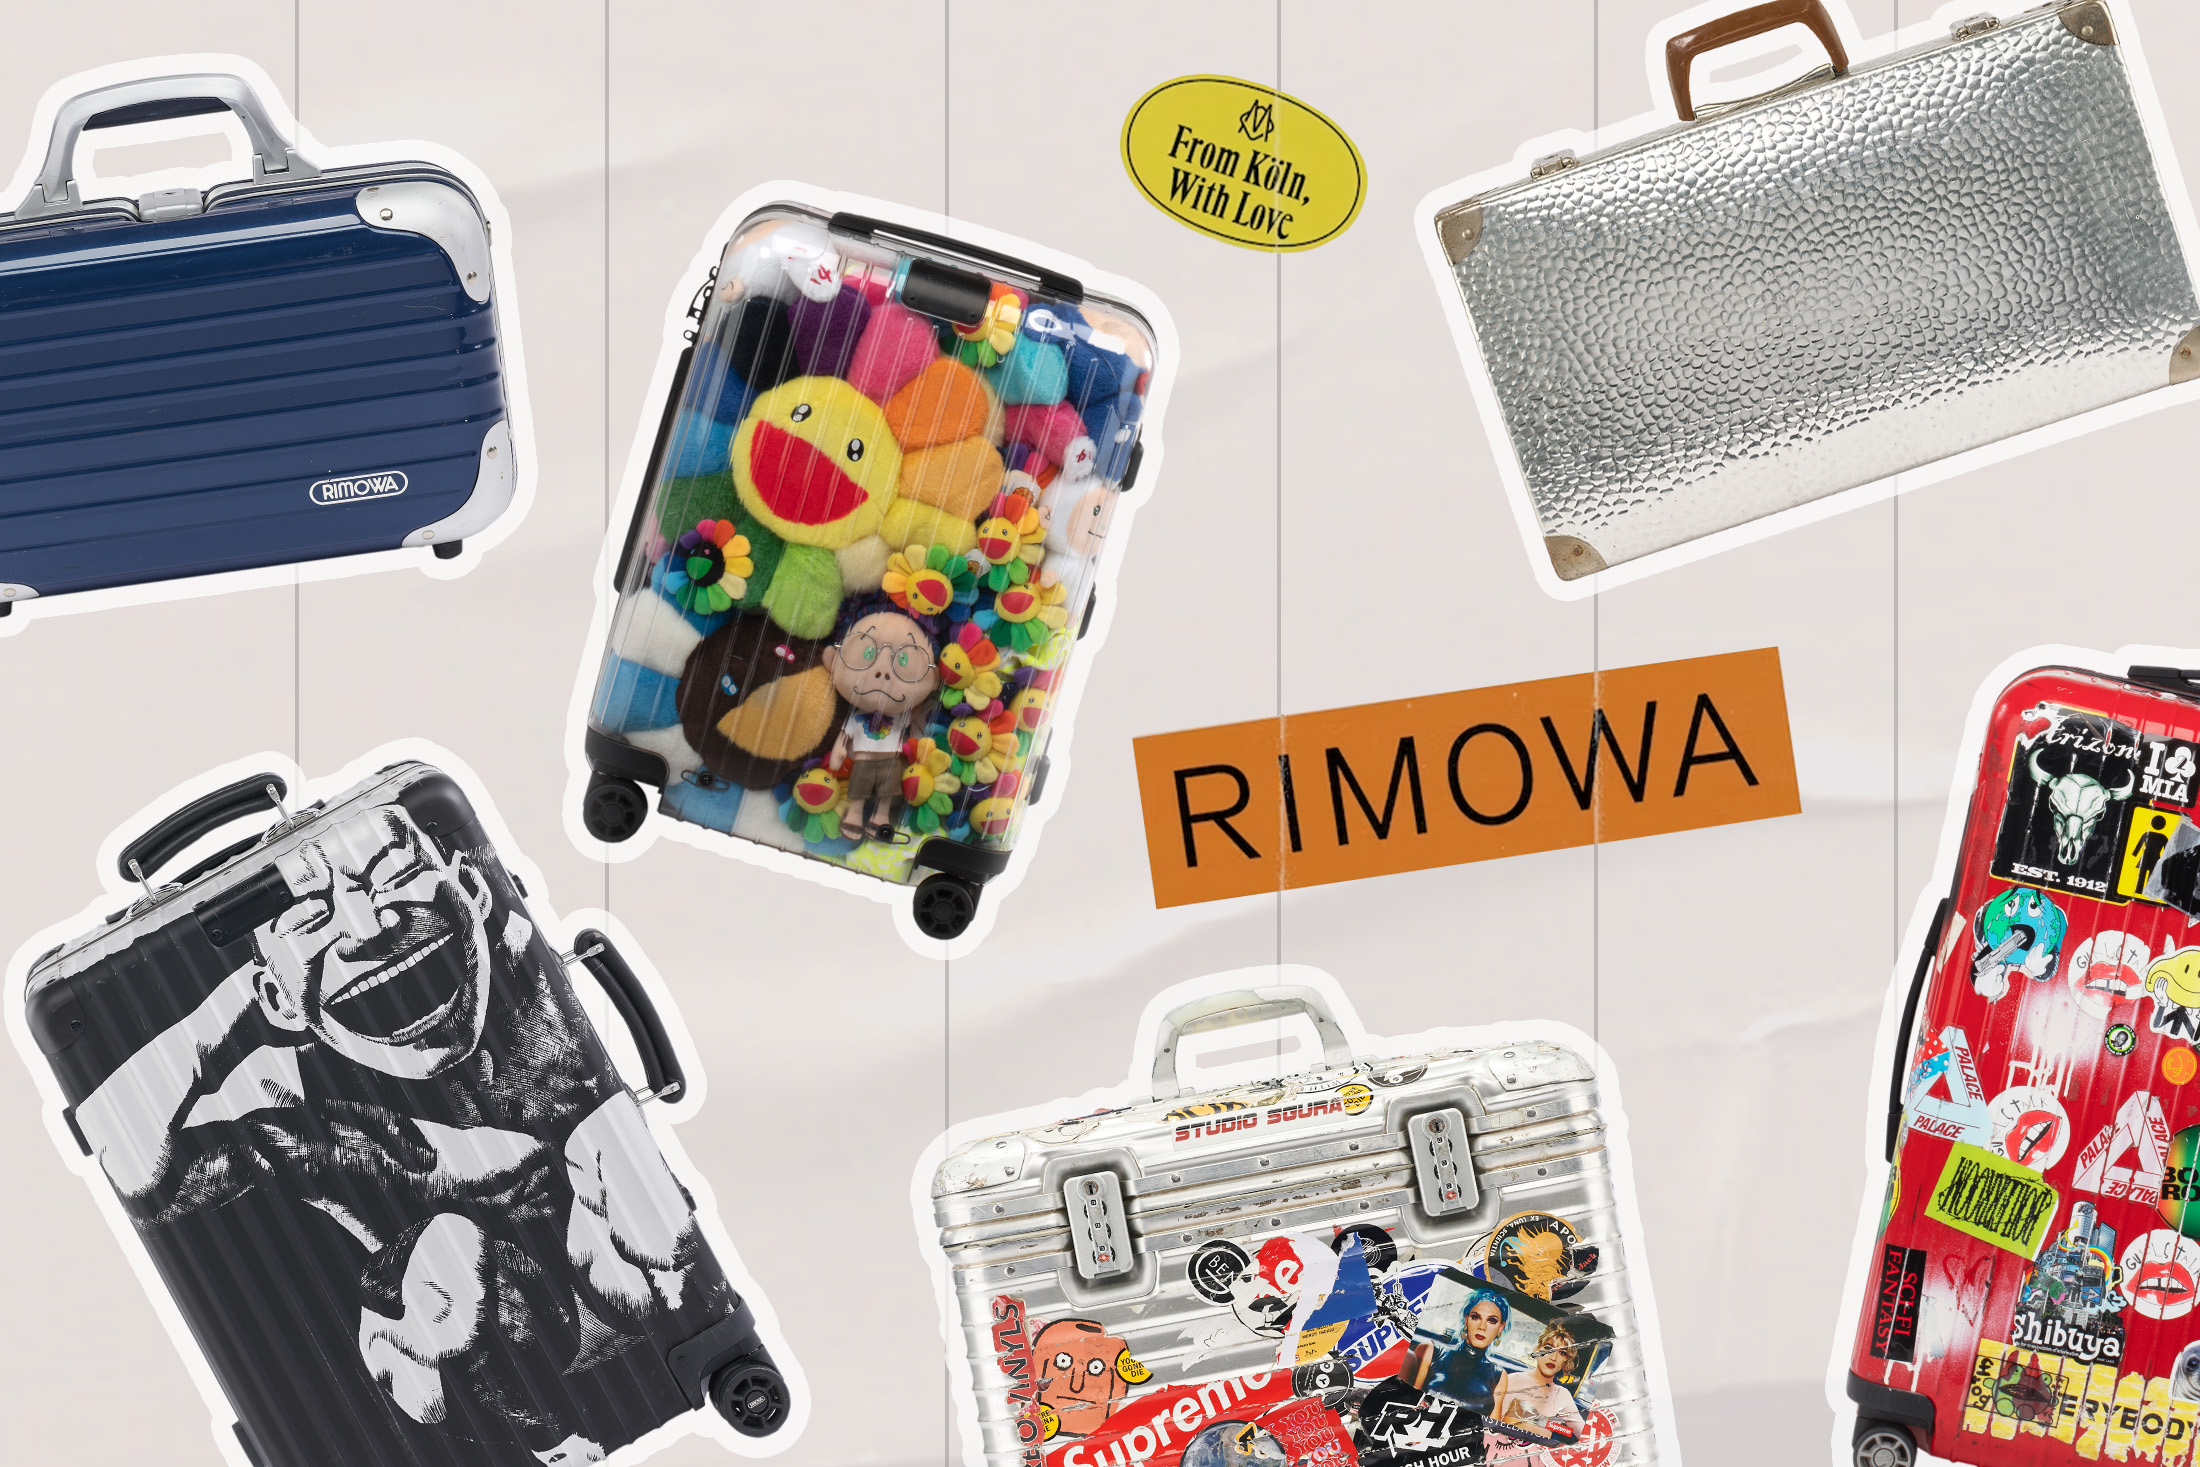 Rimowa's Luggage Evolution - Look How Luggage is Made